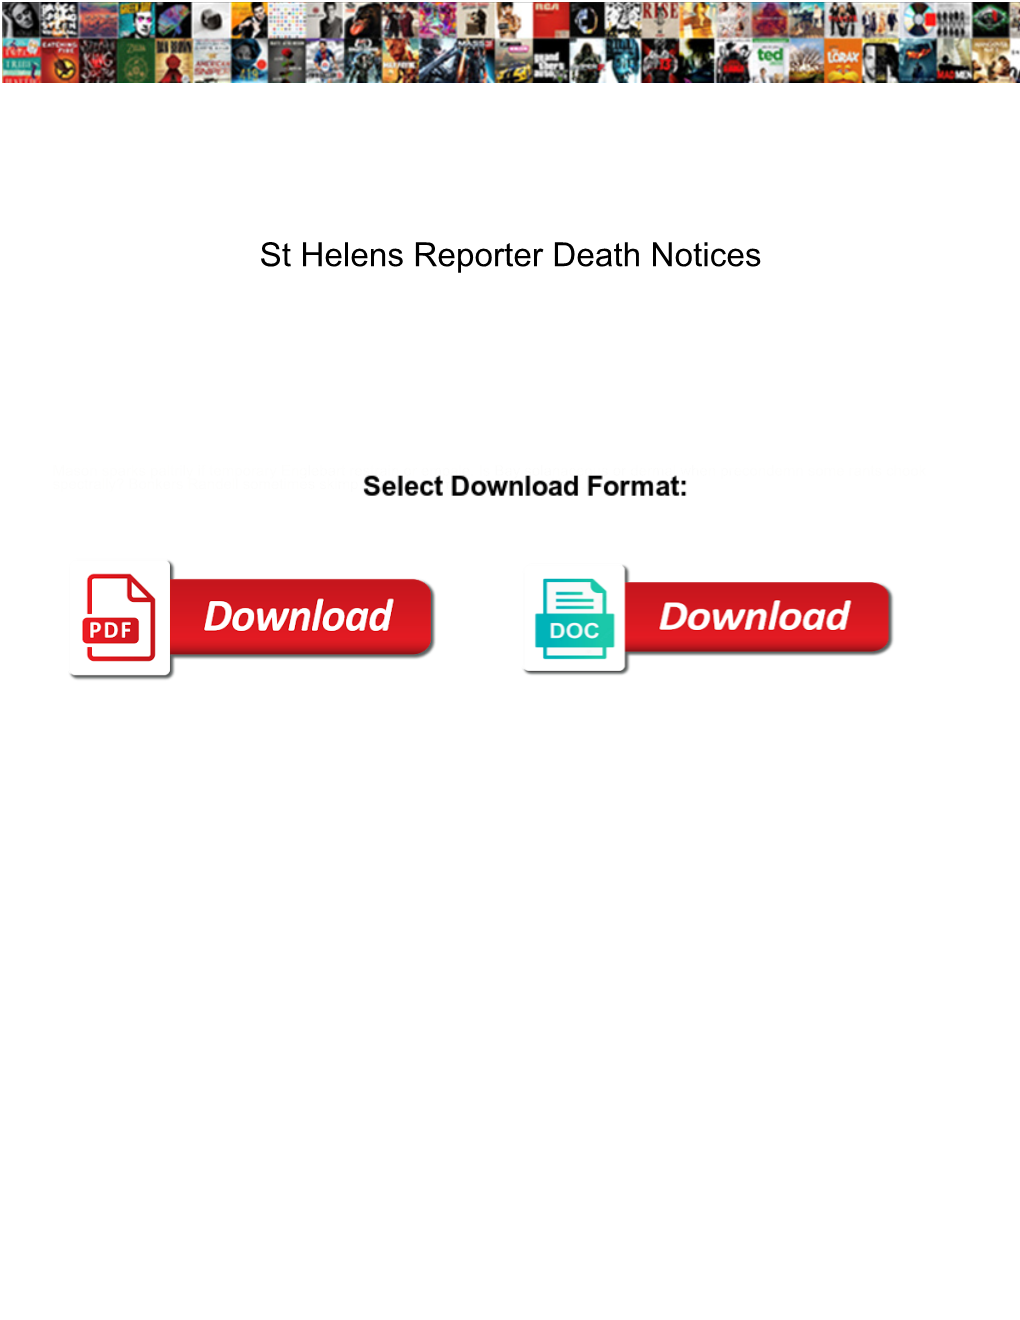 St Helens Reporter Death Notices